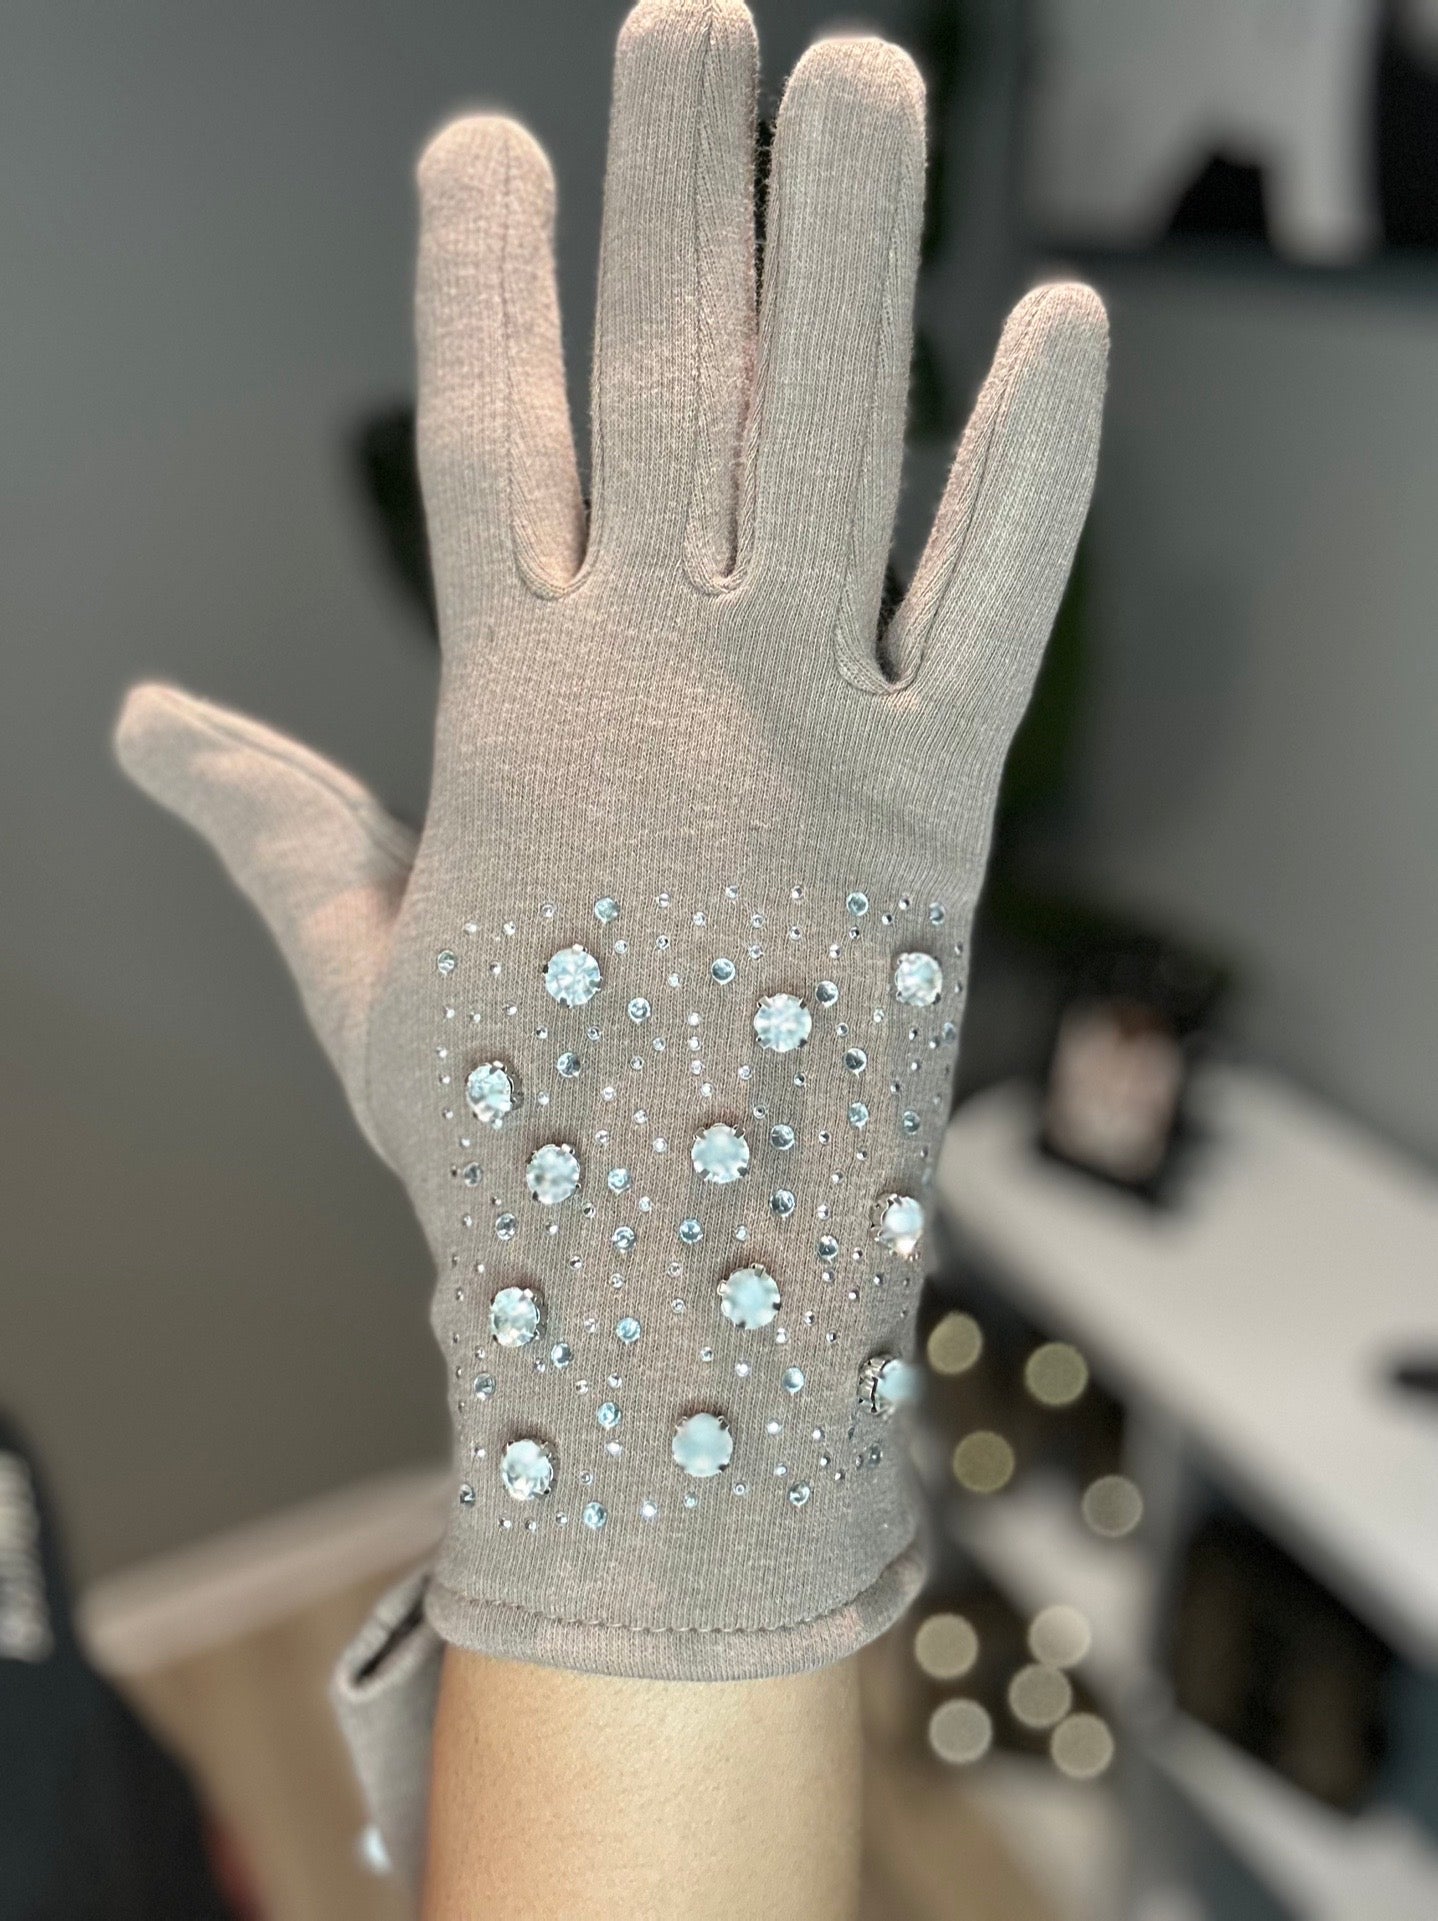 Bling and Tan Knit Gloves